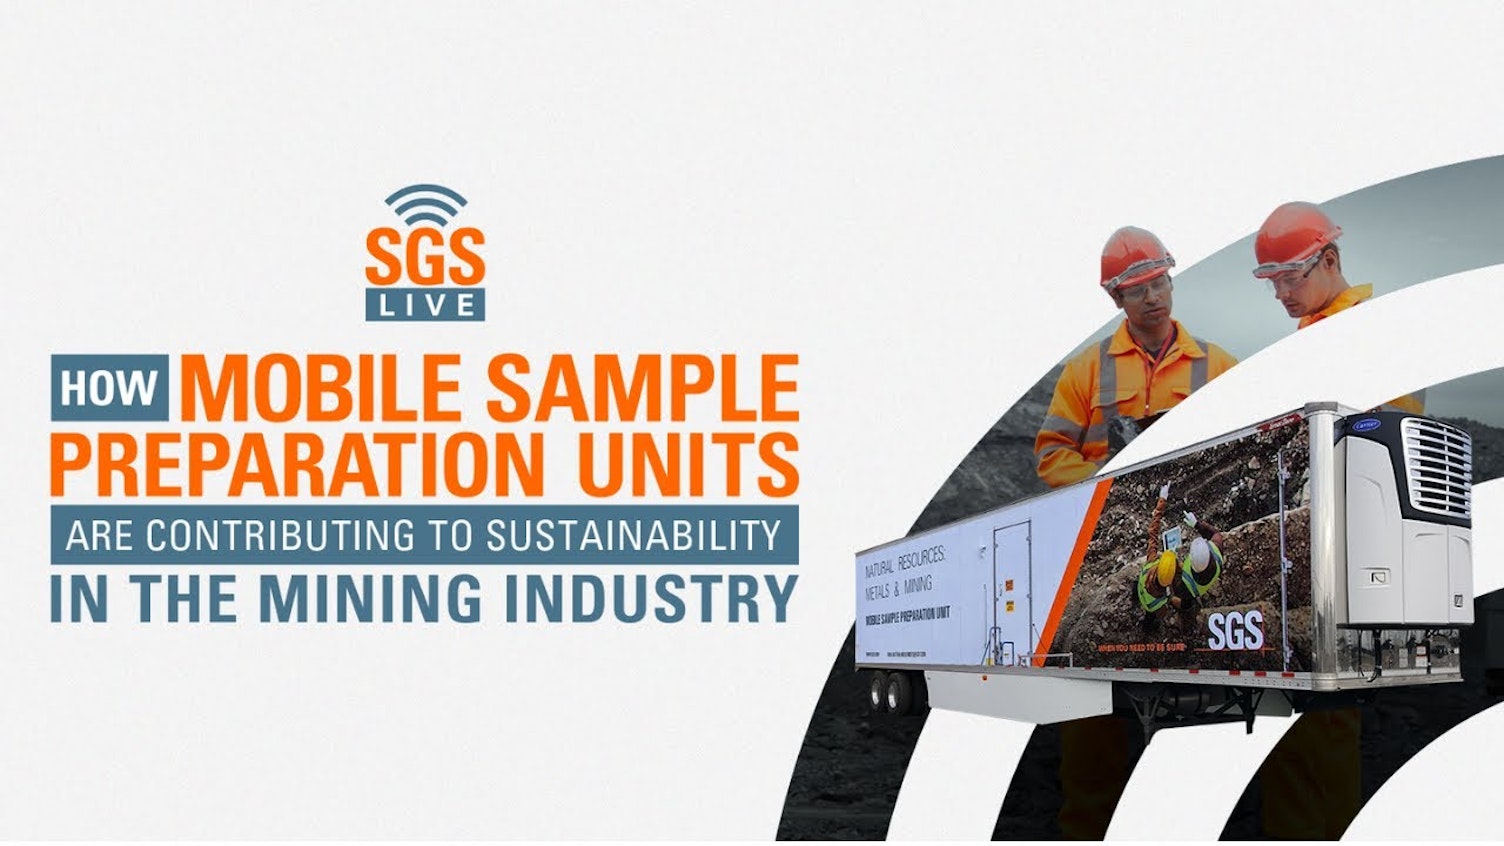 SGS Live Presents Mobile Sample Preparation Units Sustainability in the Mining Industry